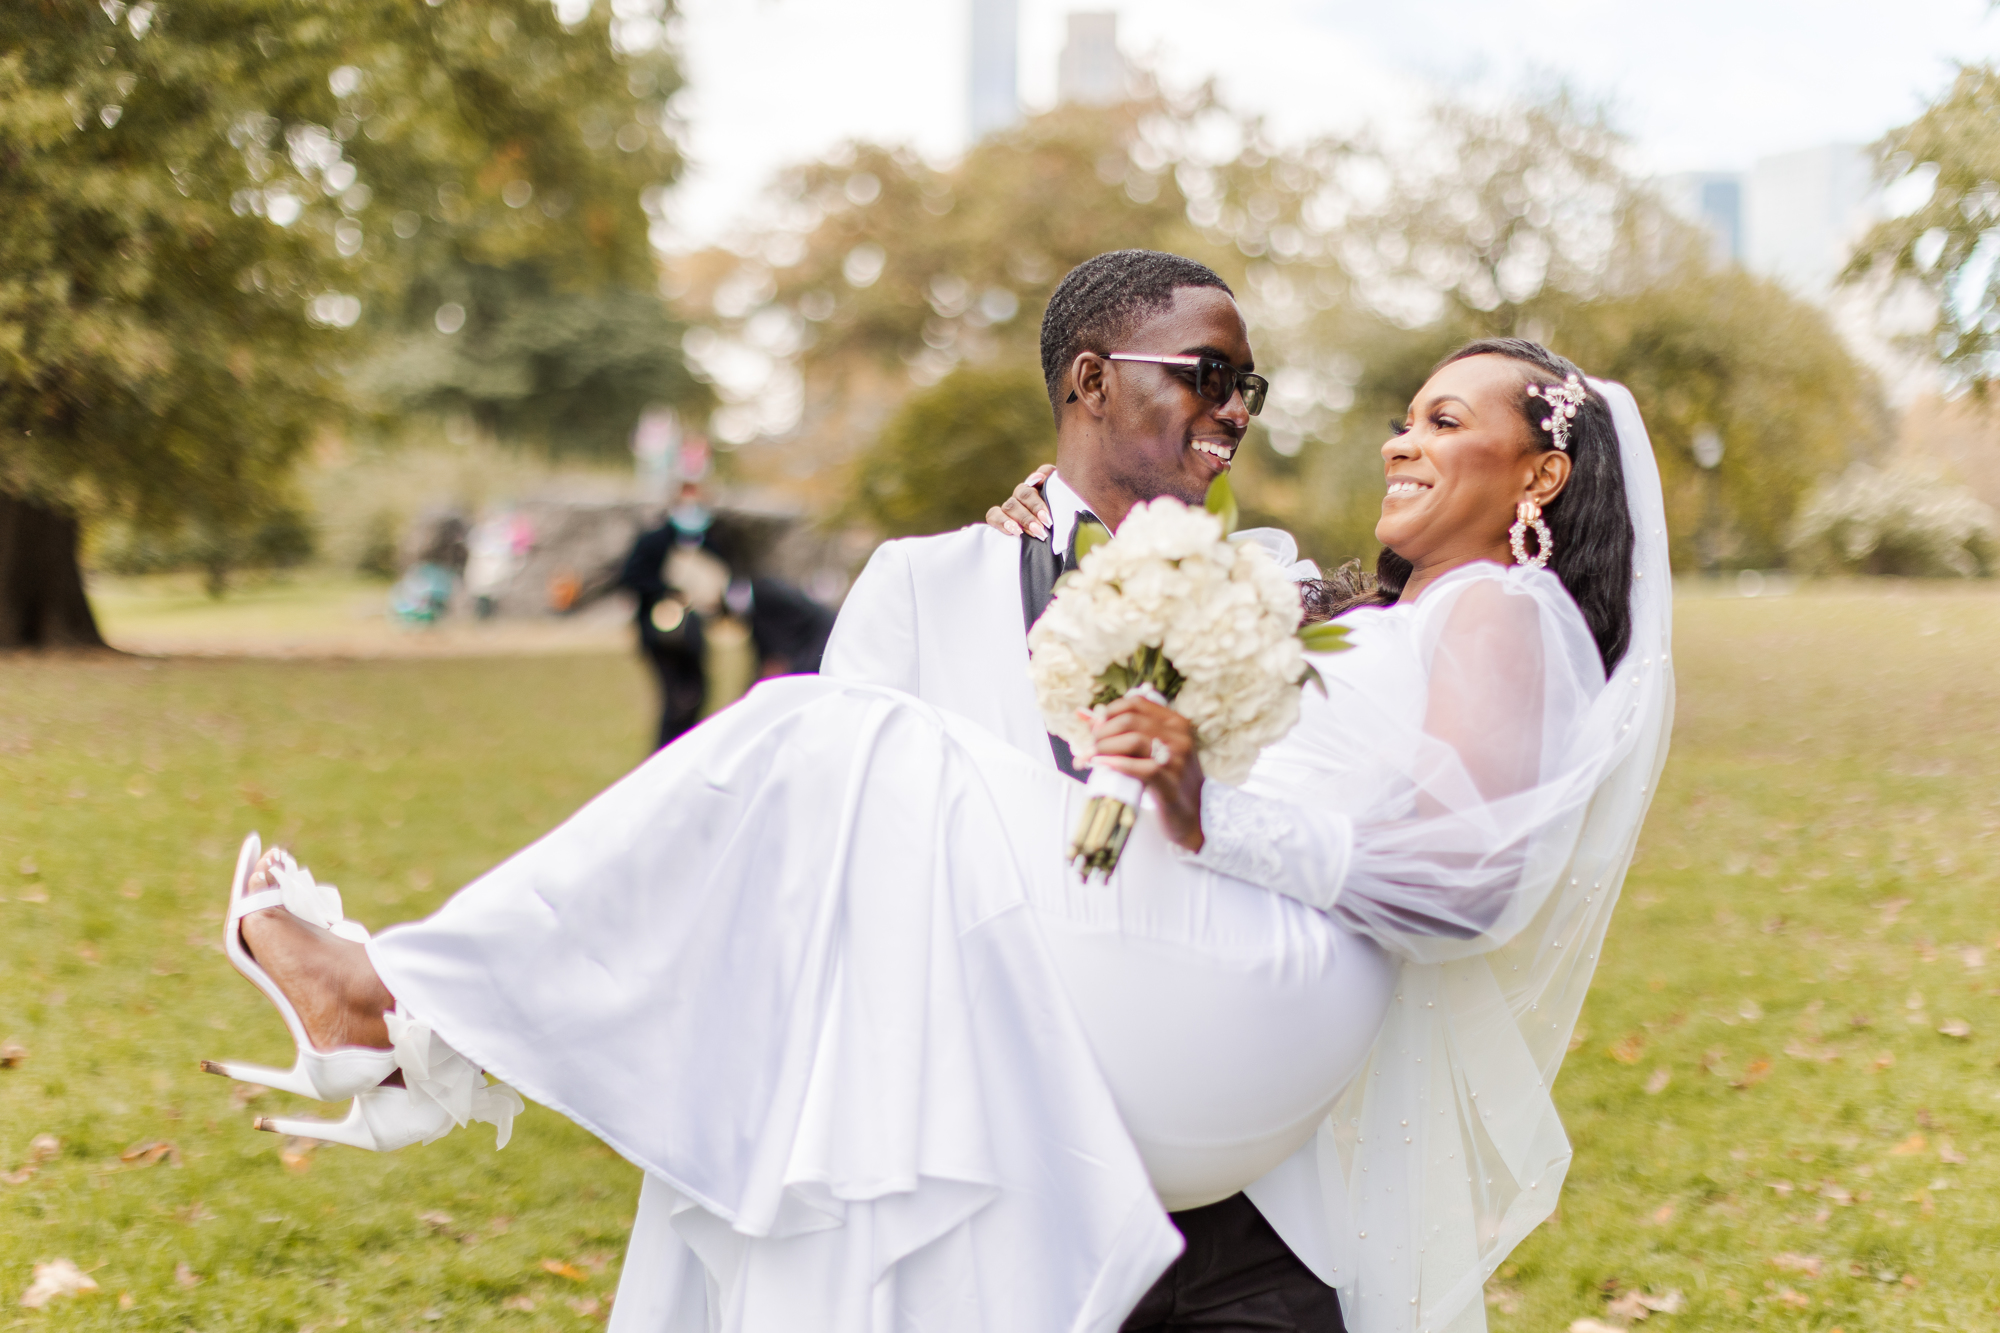 Breathtaking Central Park Wedding Photos on Cherry Hill in Fall